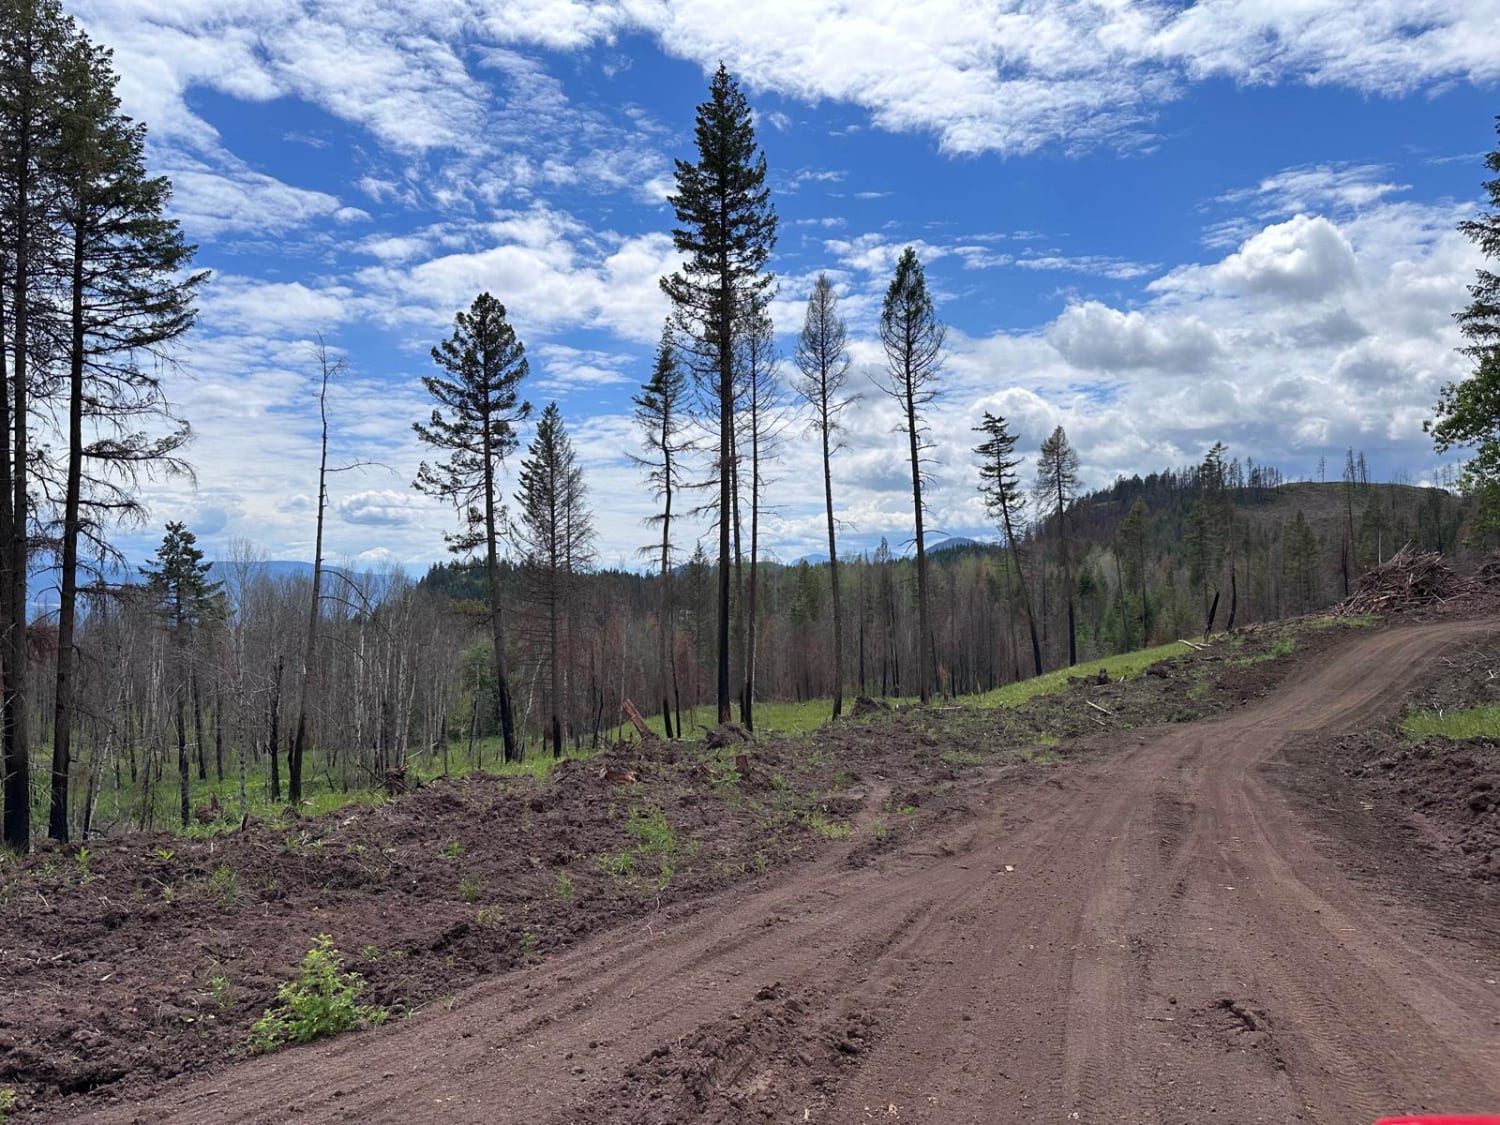 New Fire Road